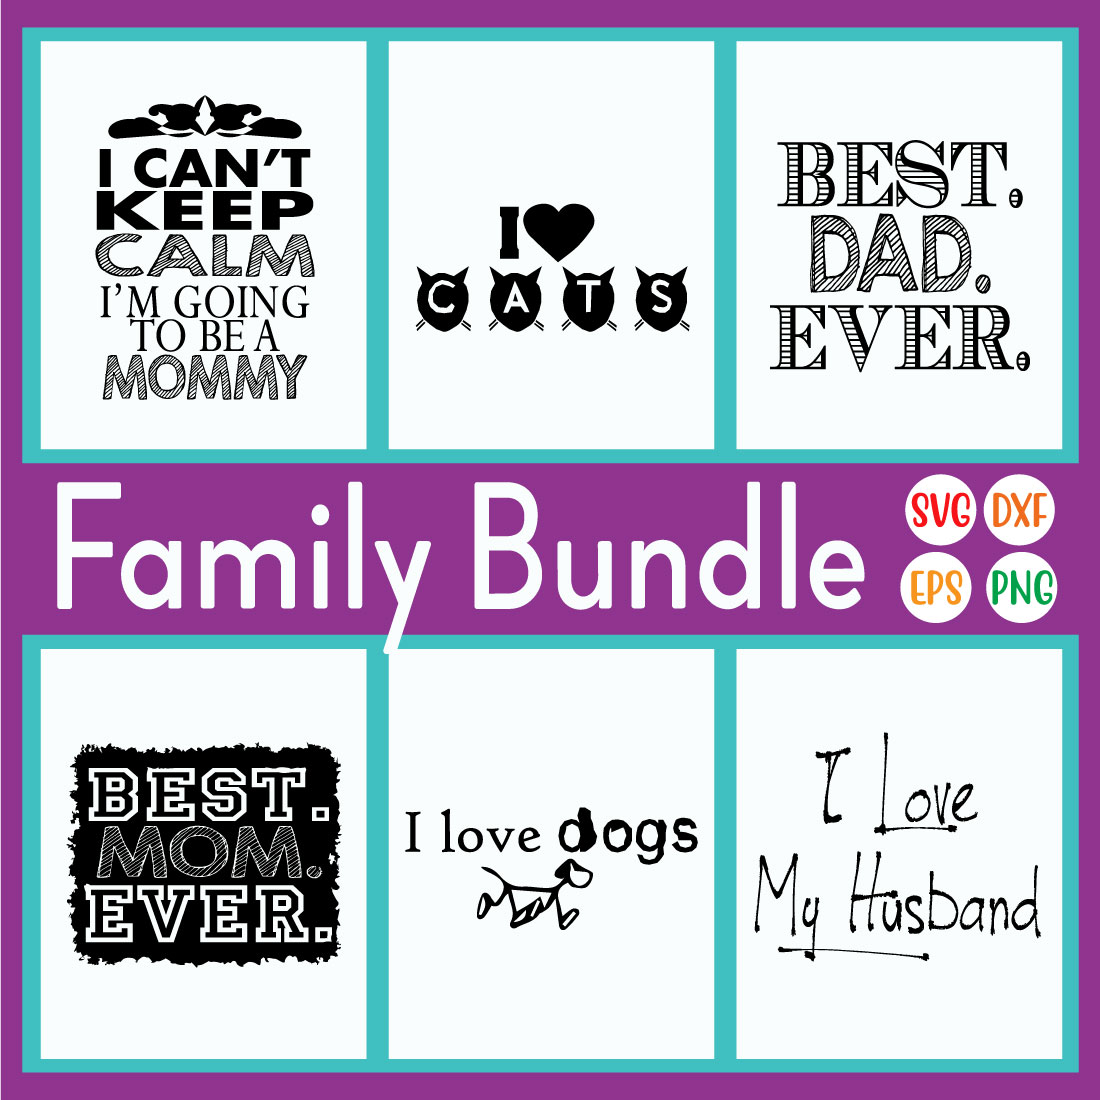 Awesome Family Designs Bundle Vol28 cover image.